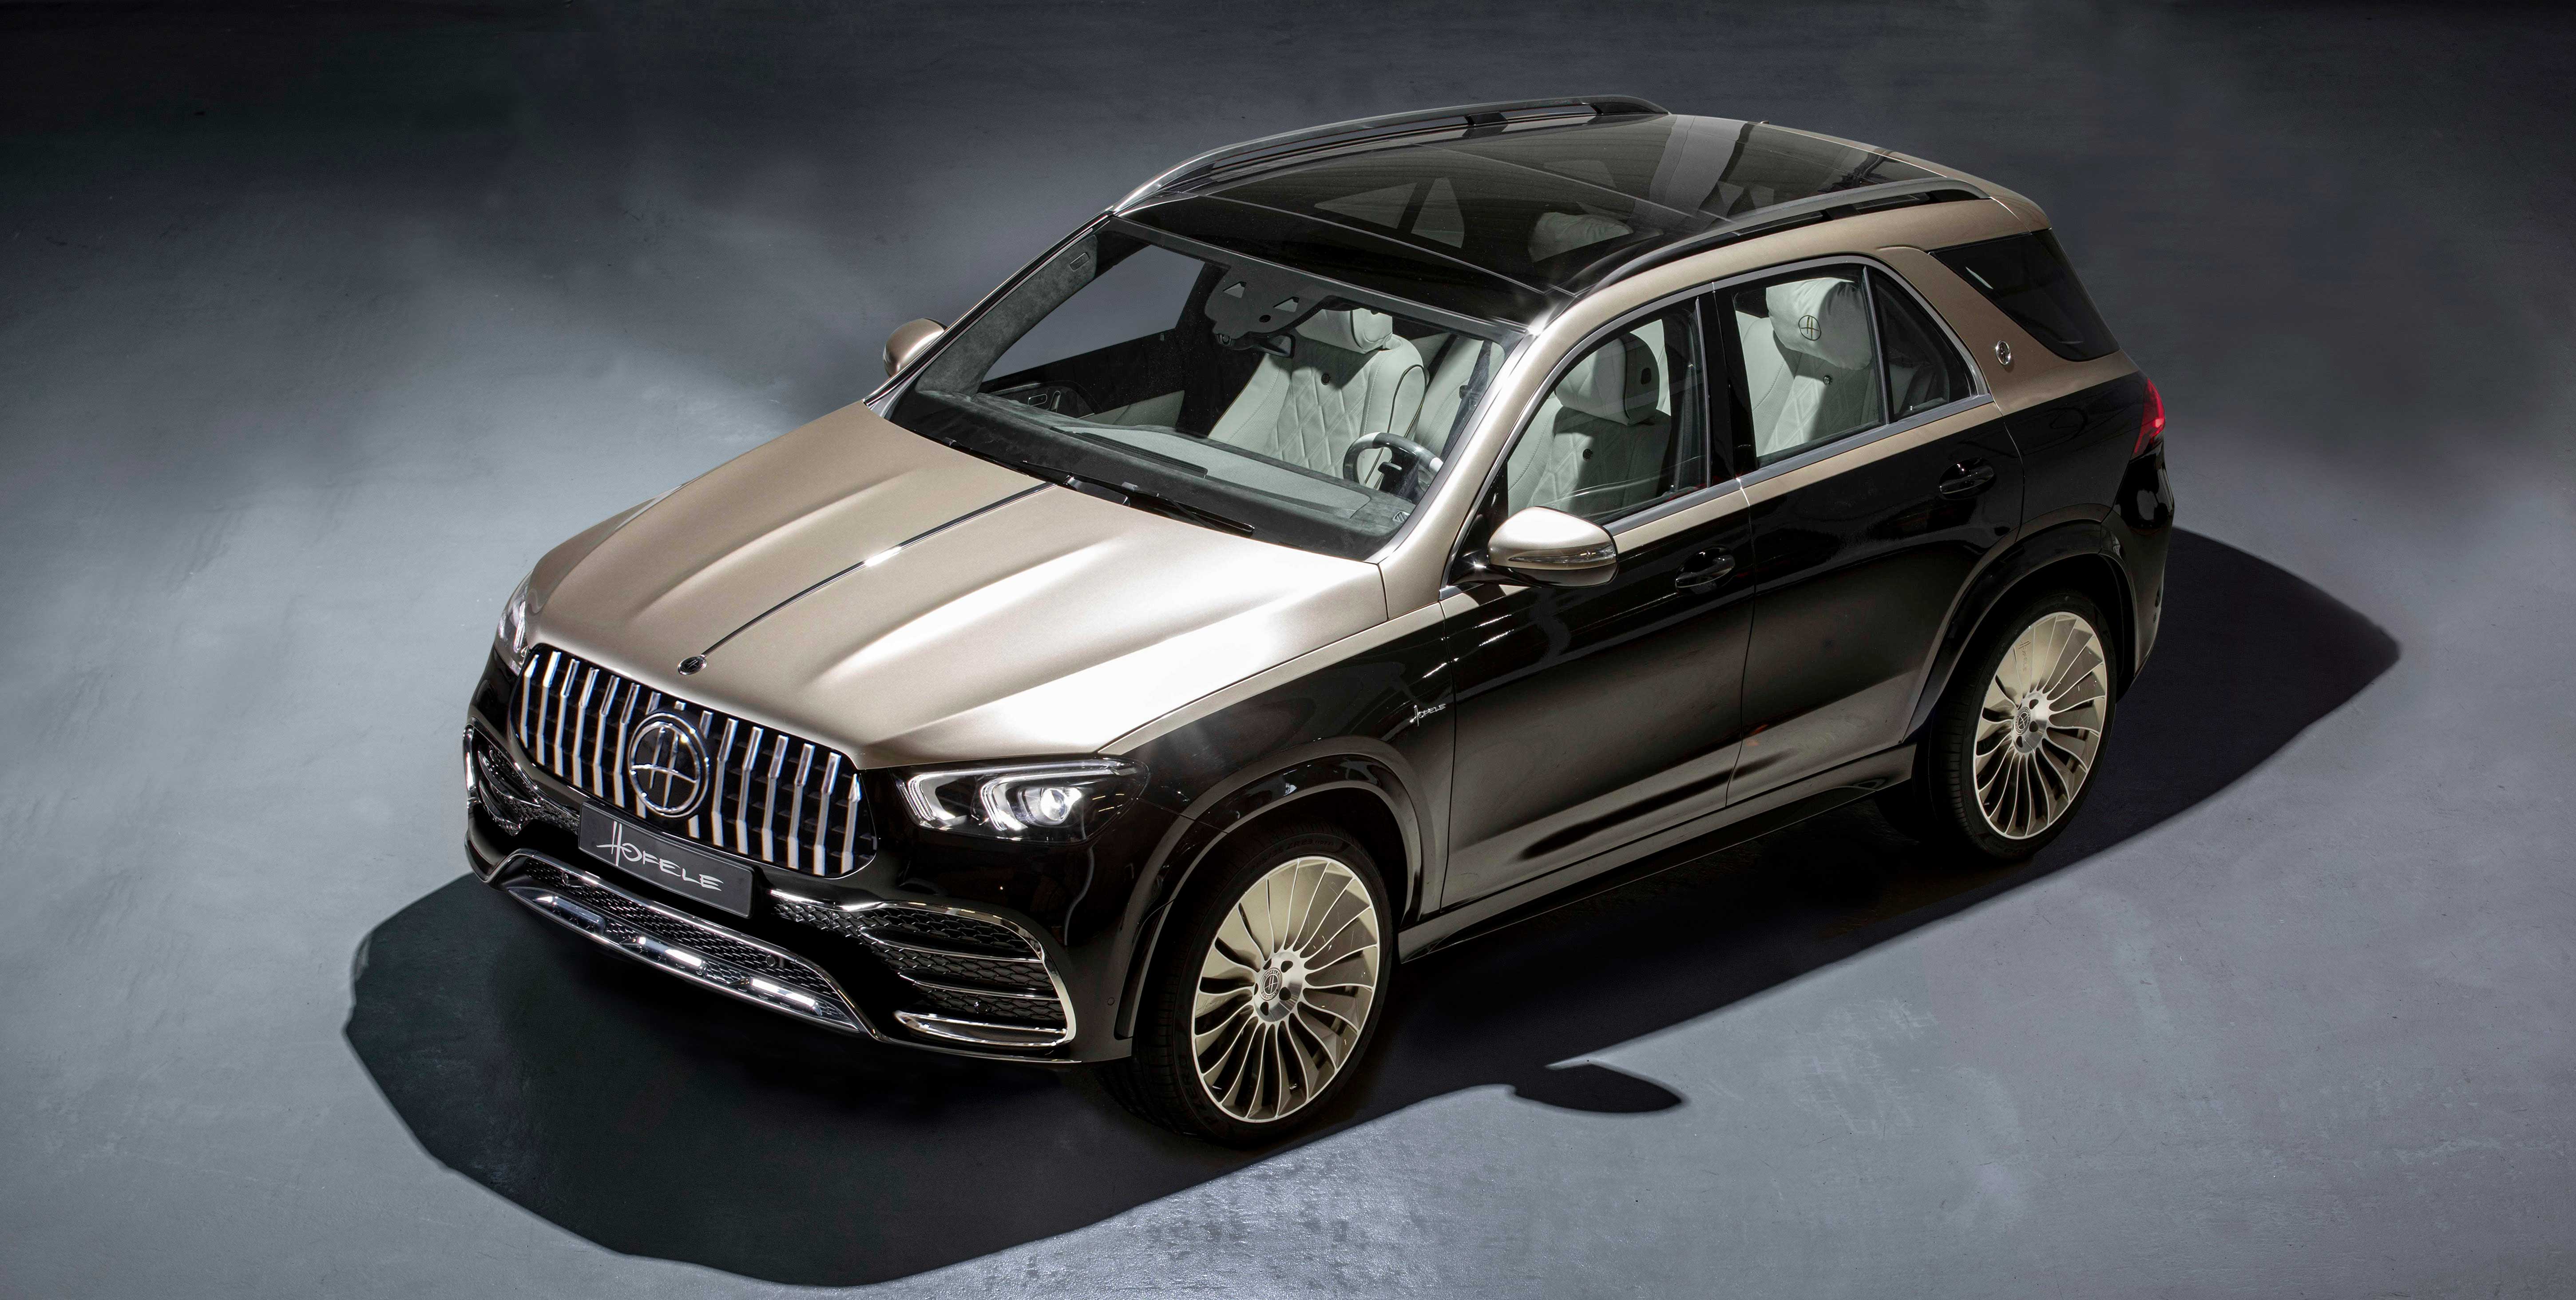 Ultimate HGLE by HOFELE based on the Mercedes-Benz GLE SUV